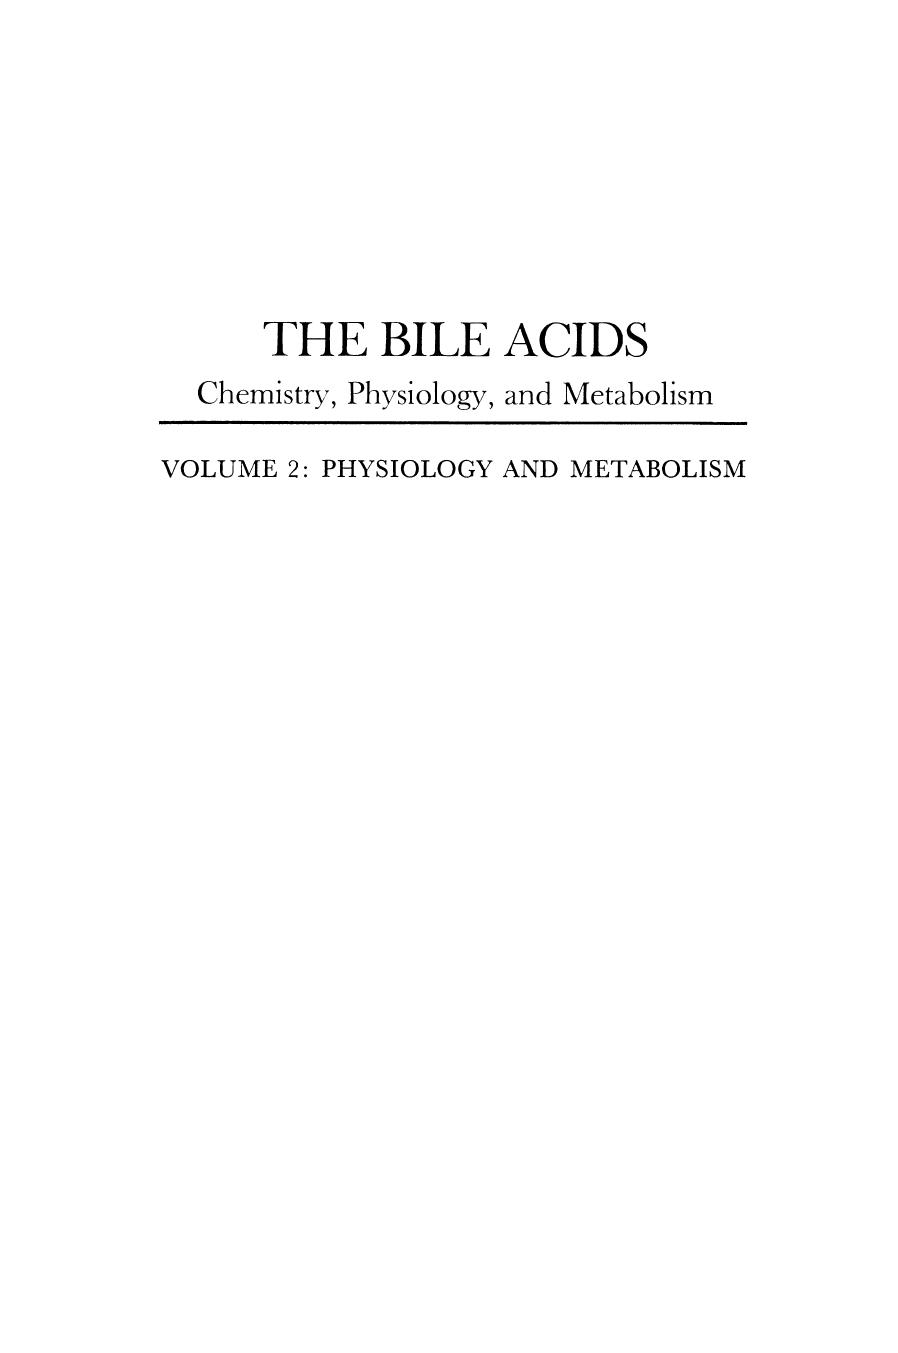 The Bile Acids, Chemistry, Physiology, and Metabolism  Volume 2  Physiology and Metabolism 1973